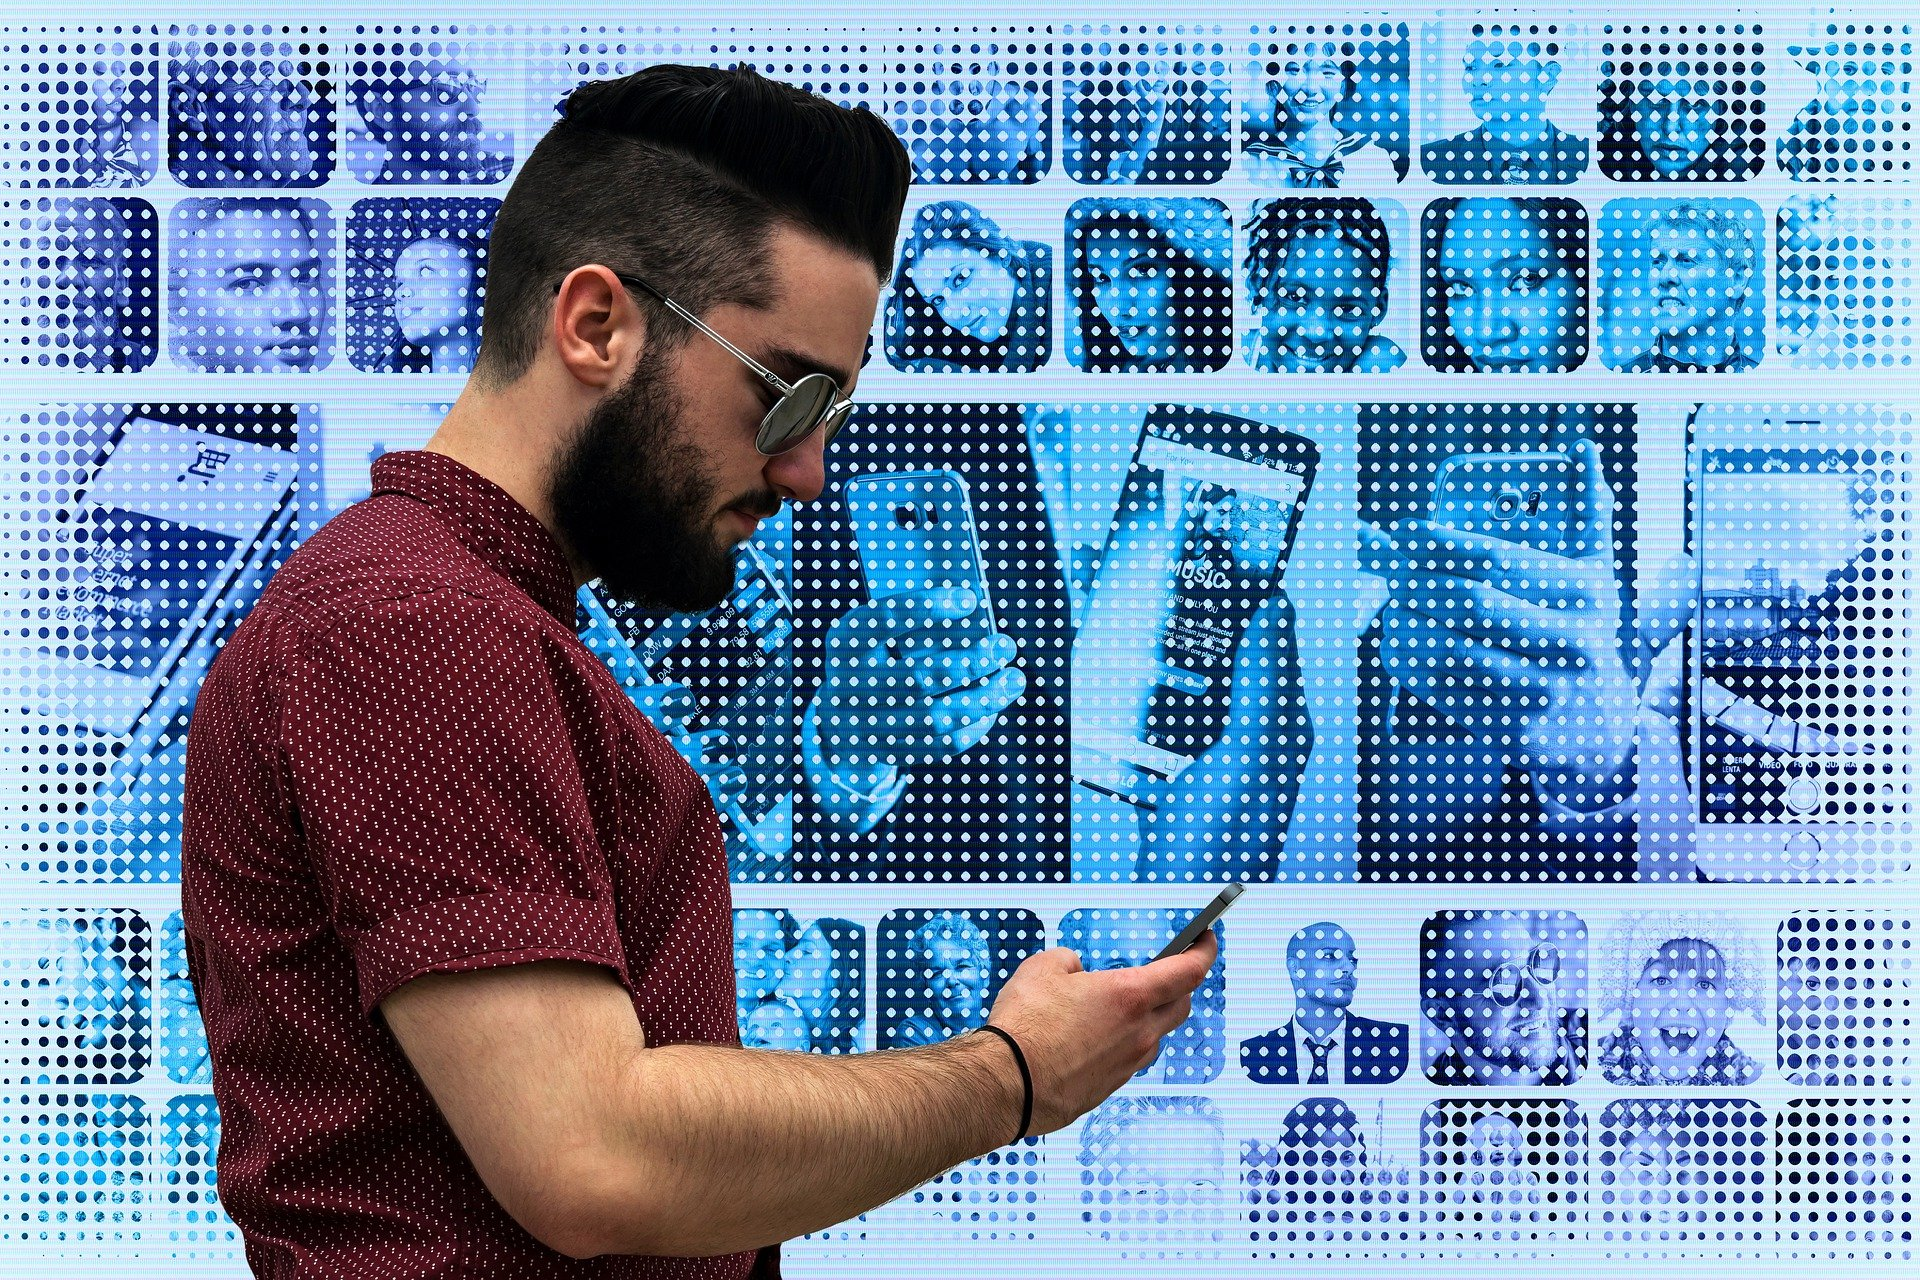 Man on mobile phone with pixalated image of phone screens behind him 